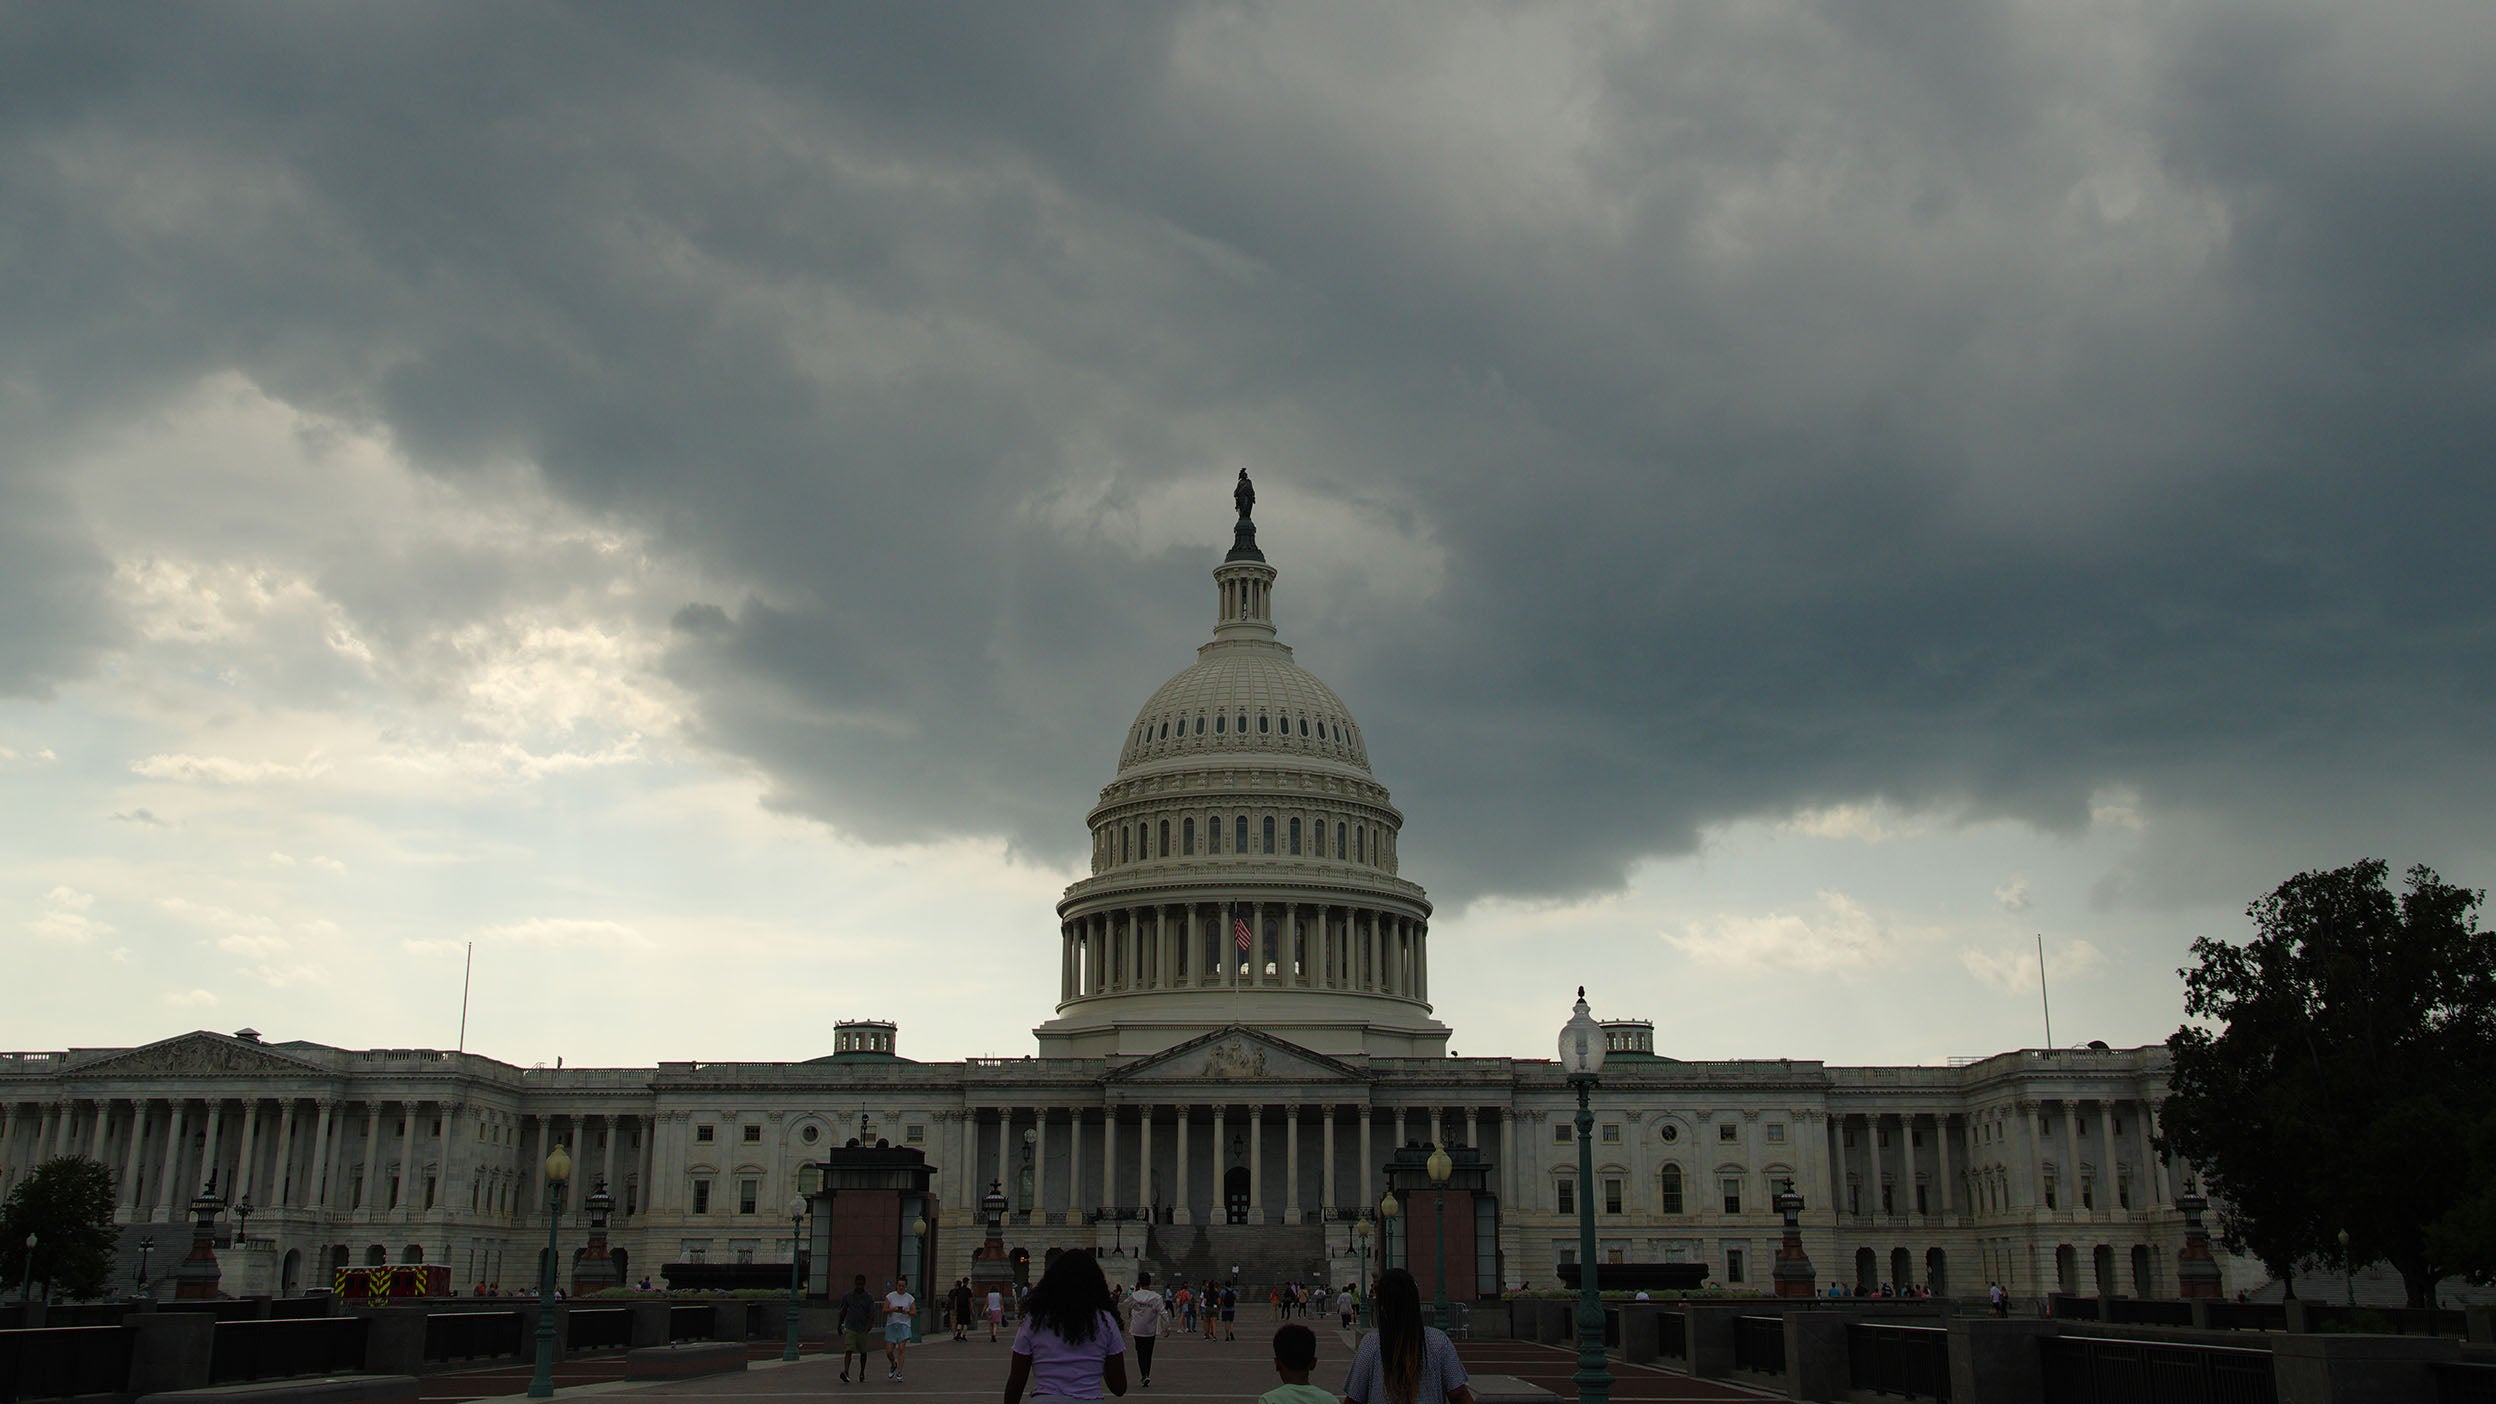 An approaching thunderstorm brings dark clouds to the U.S. Capitol in Washington, DC.